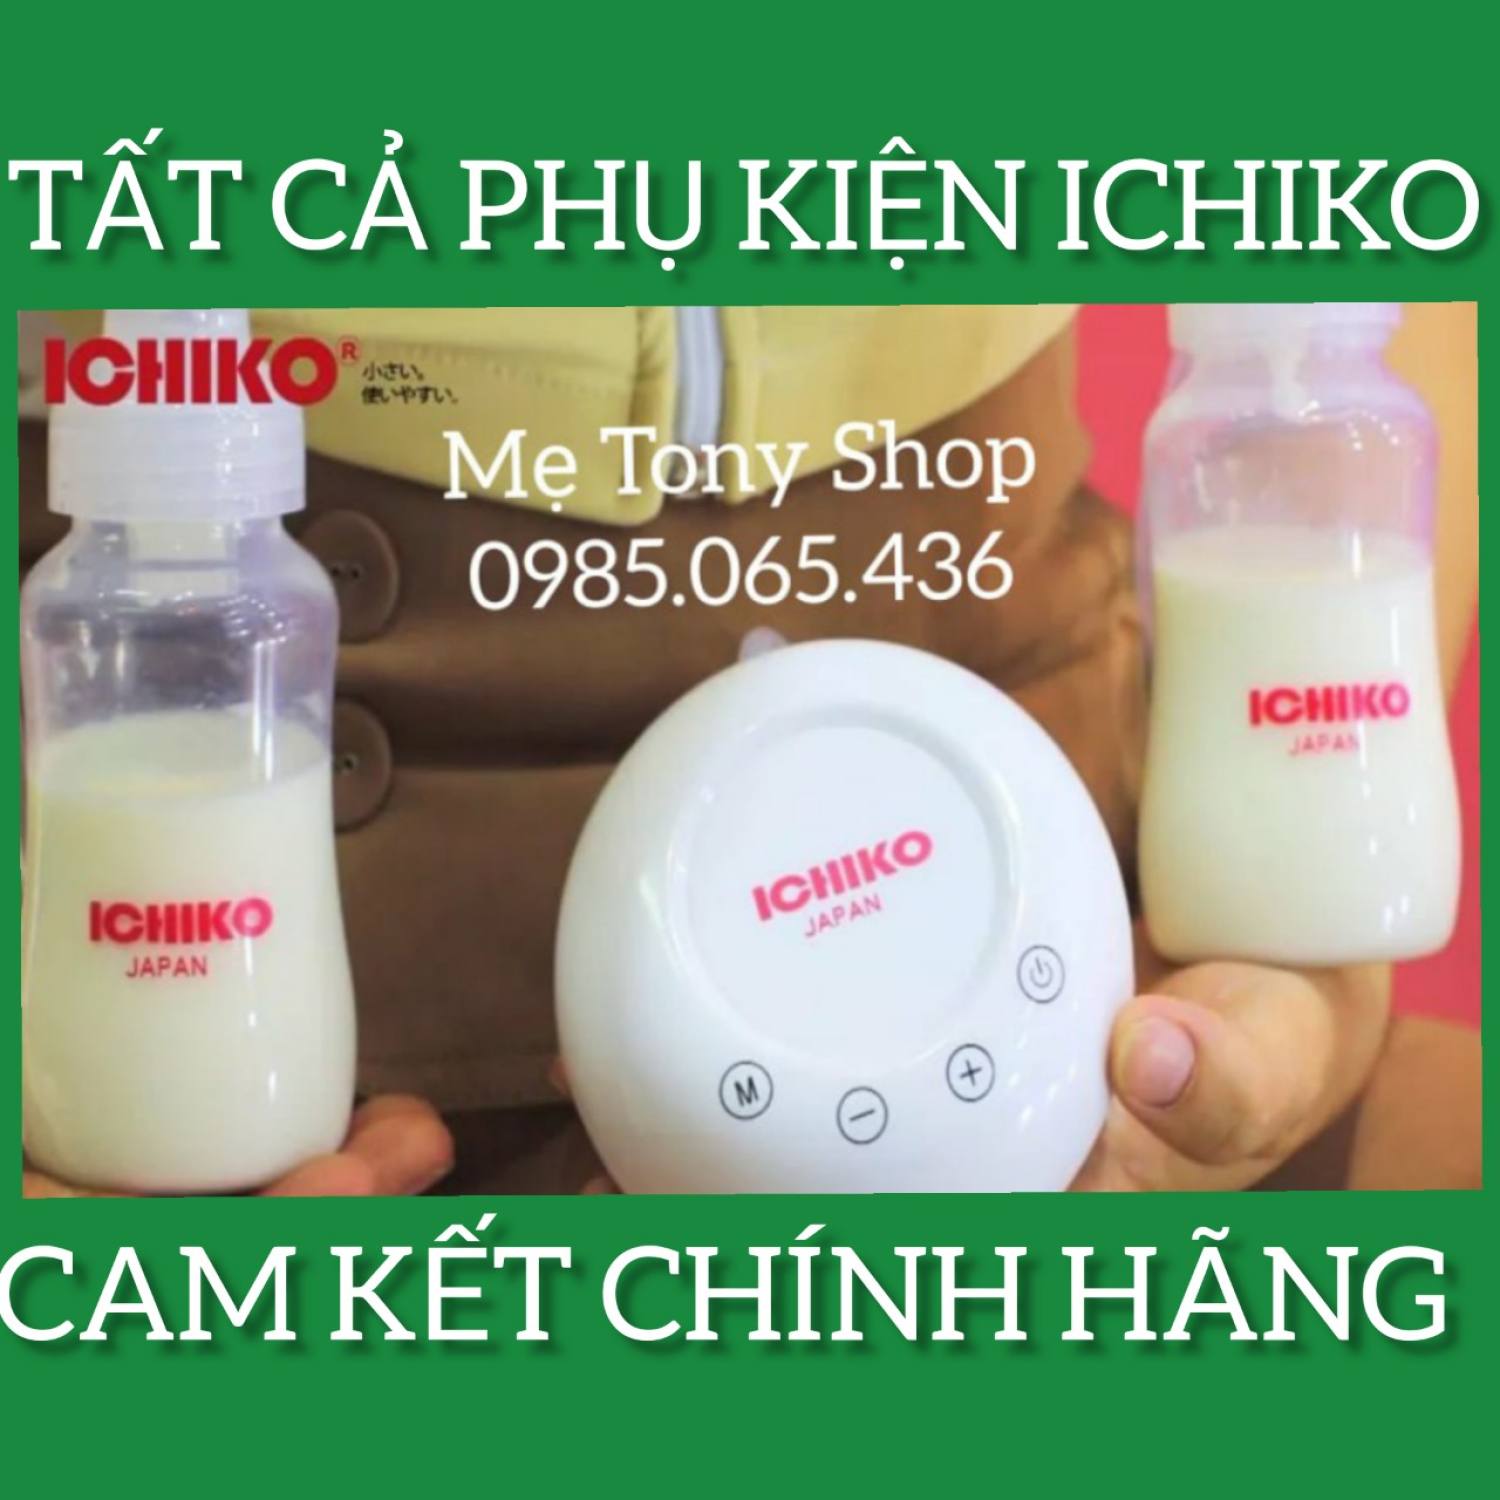 Genuine promise all Japanese Ichiko double electric breast pump